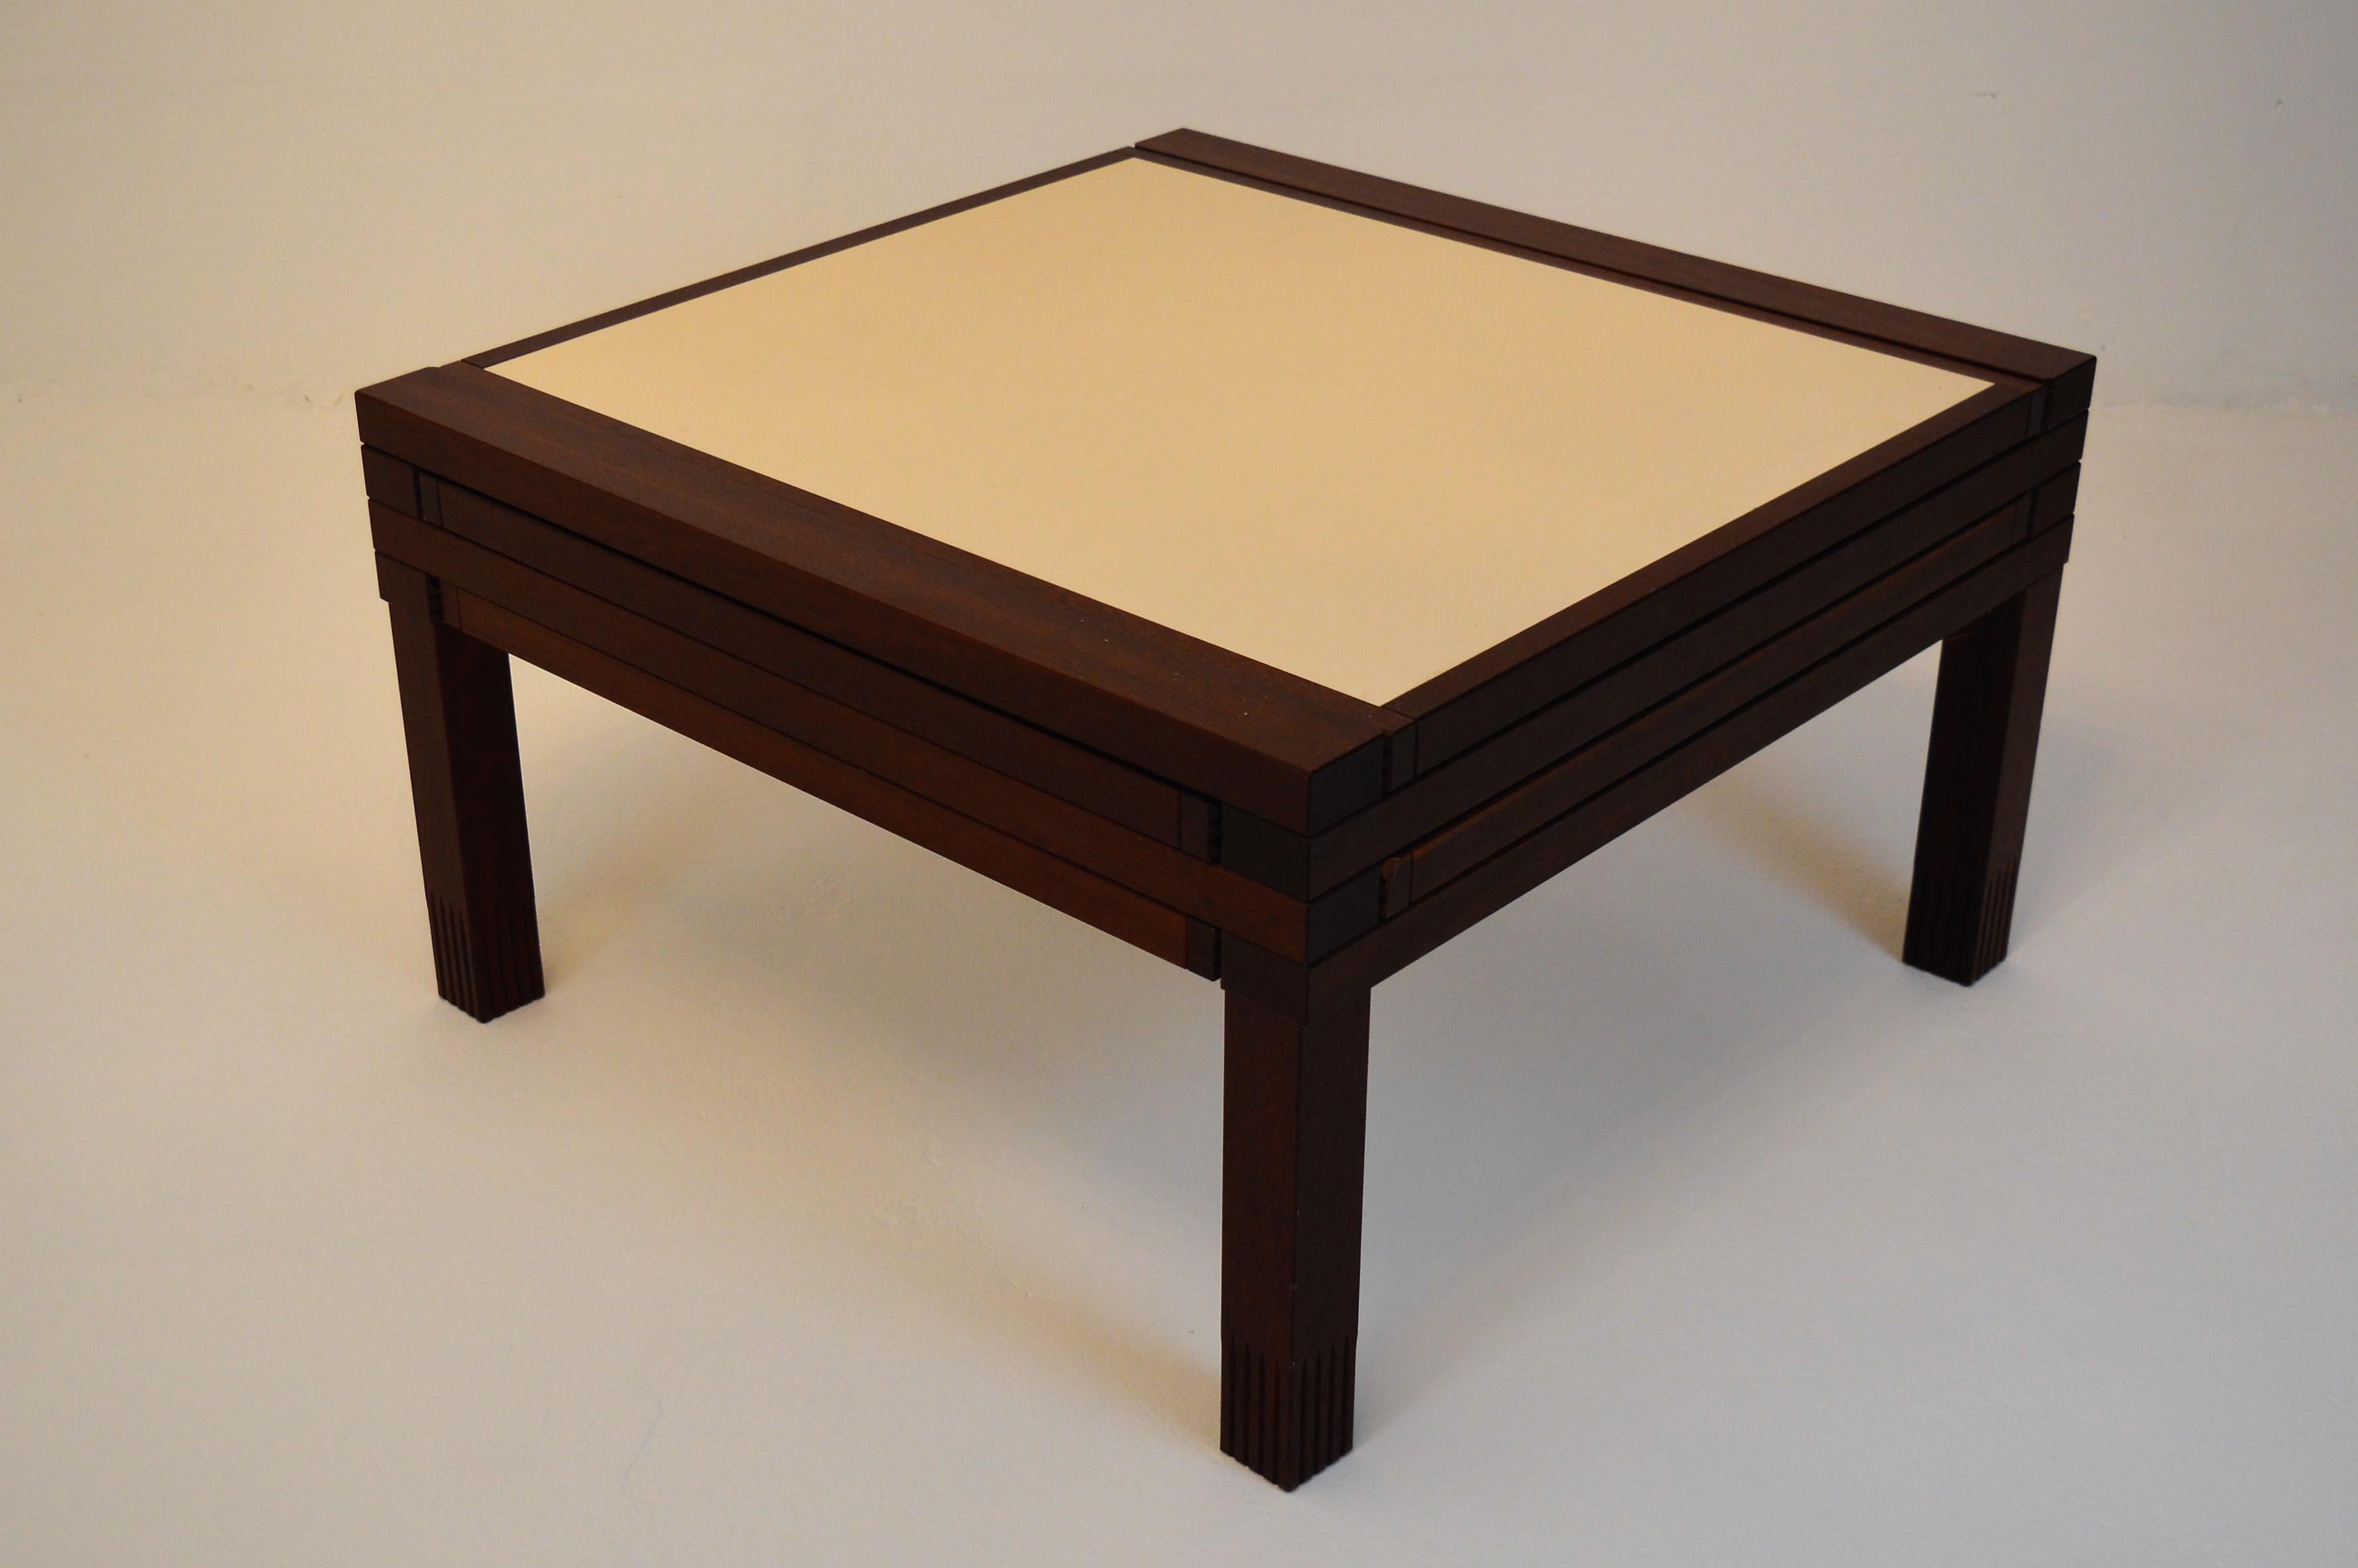 Very exceptional, first edition coffee table by Bernard Vuarnesson (Sweden) for Bellato in Italy, 1980s.
This table in solid Iroko-wood has four reversible laminated tops/drawers: 3 in red and white and one in black and white, which can be